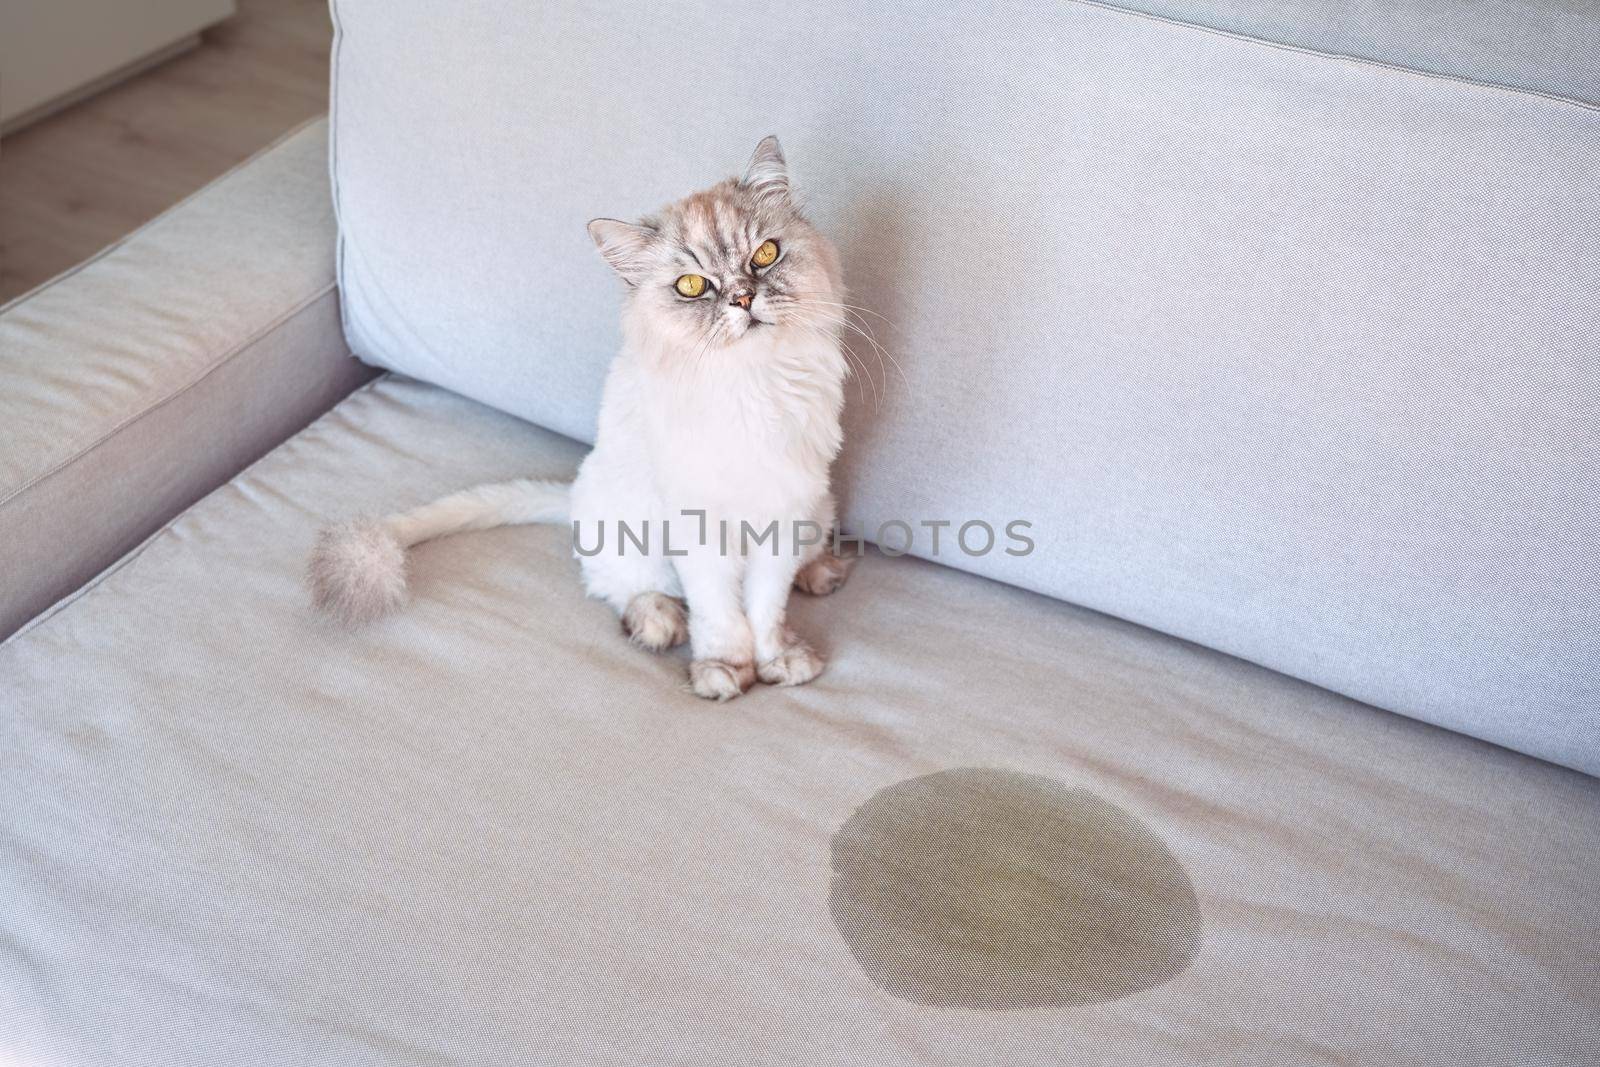 Cat urinating at home. Cat sitting near wet or piss spot on the couch by DariaKulkova